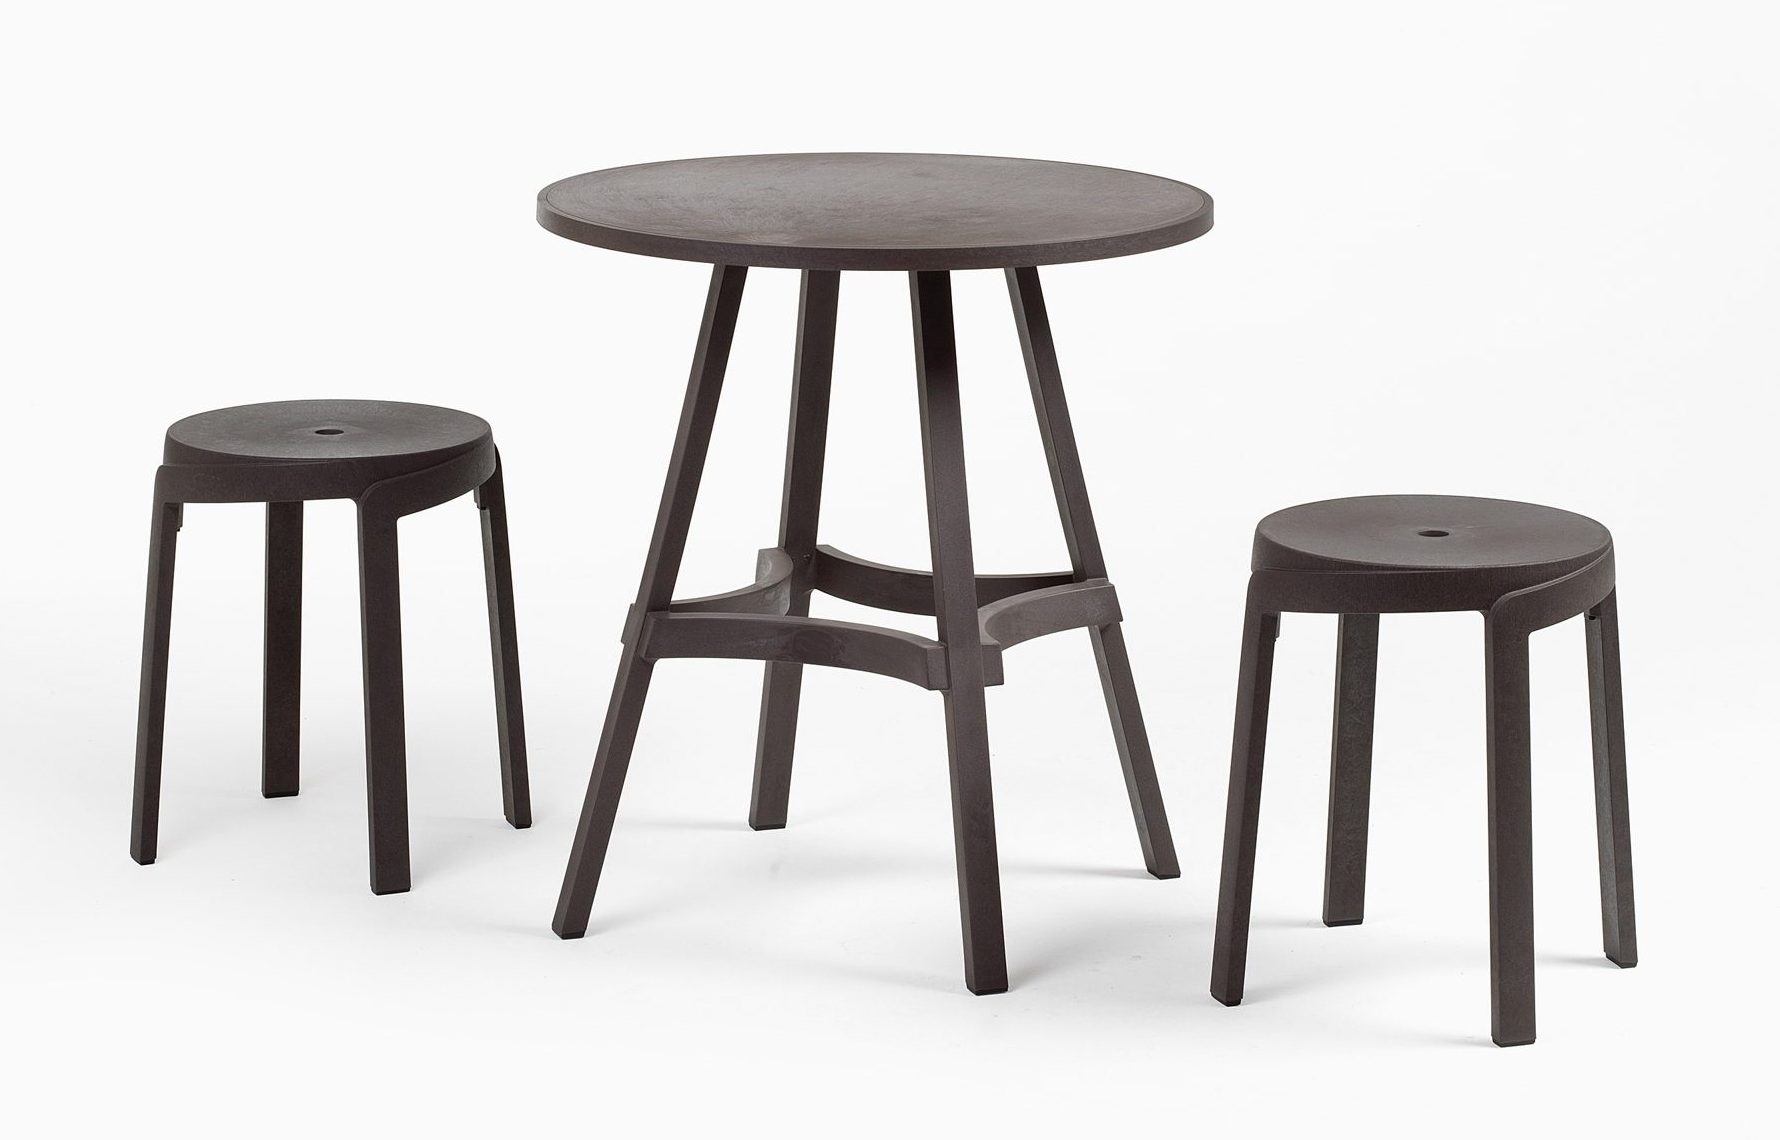 Photograph of short stools next to short table on white bacckdrop